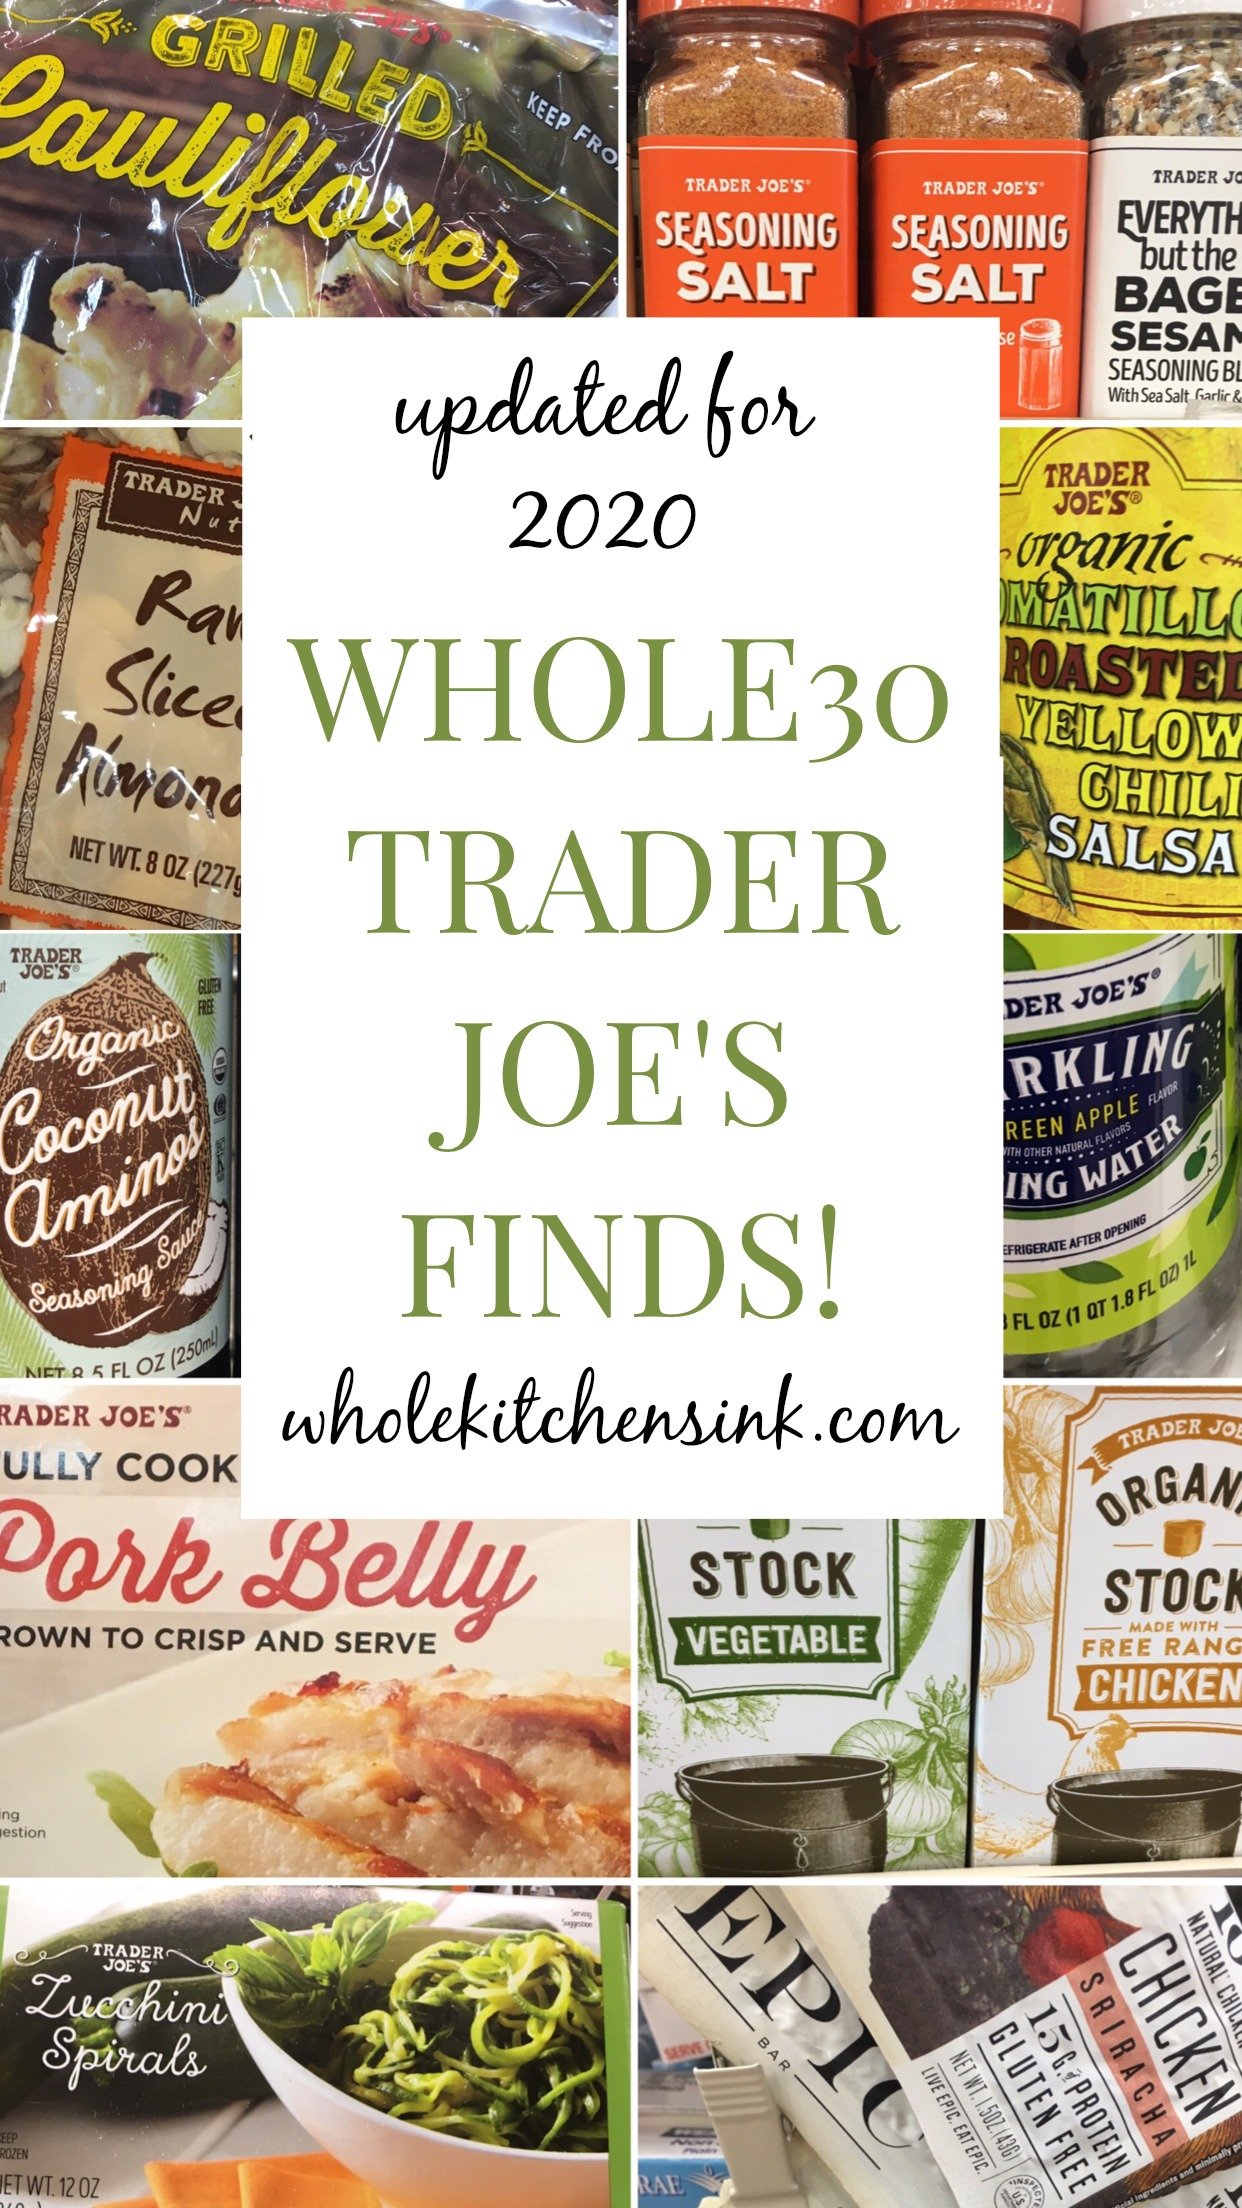 Whole30 grocery shopping has never been easier with this Whole30 Trader Joe's Shopping List! The best Trader Joe's Whole30 foods and products are all in this post to make your Whole30 easier! #whole30traderjoes #whole30shoppingguide #whole30